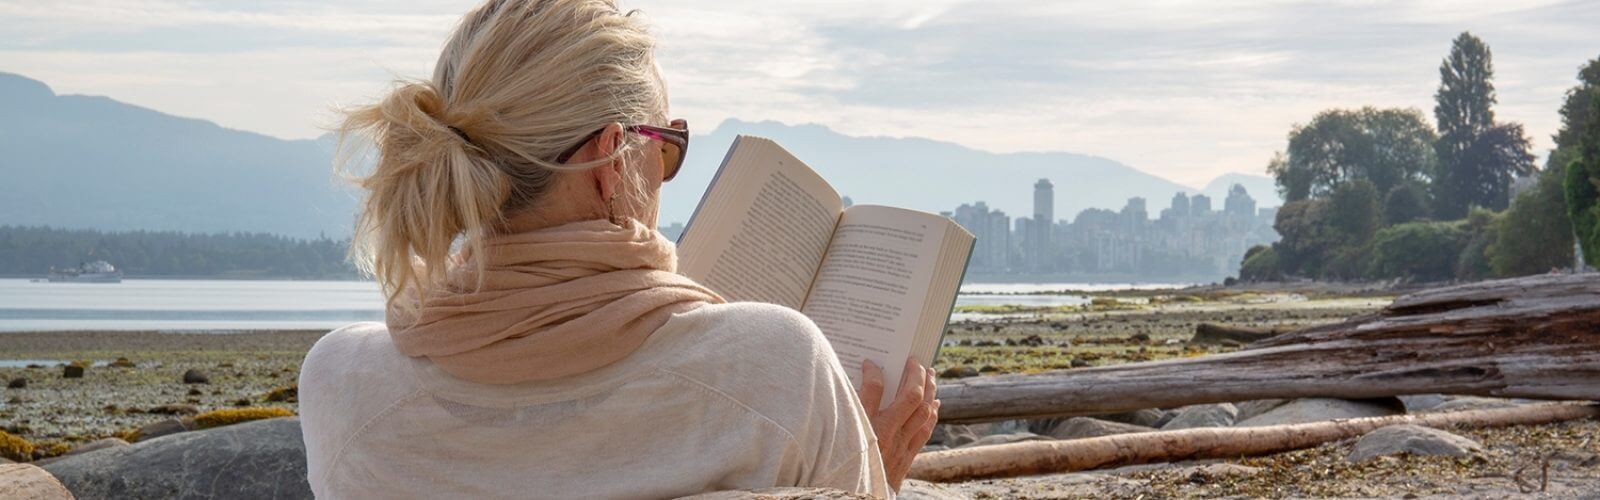 5 Essential Travel Reads For The Road